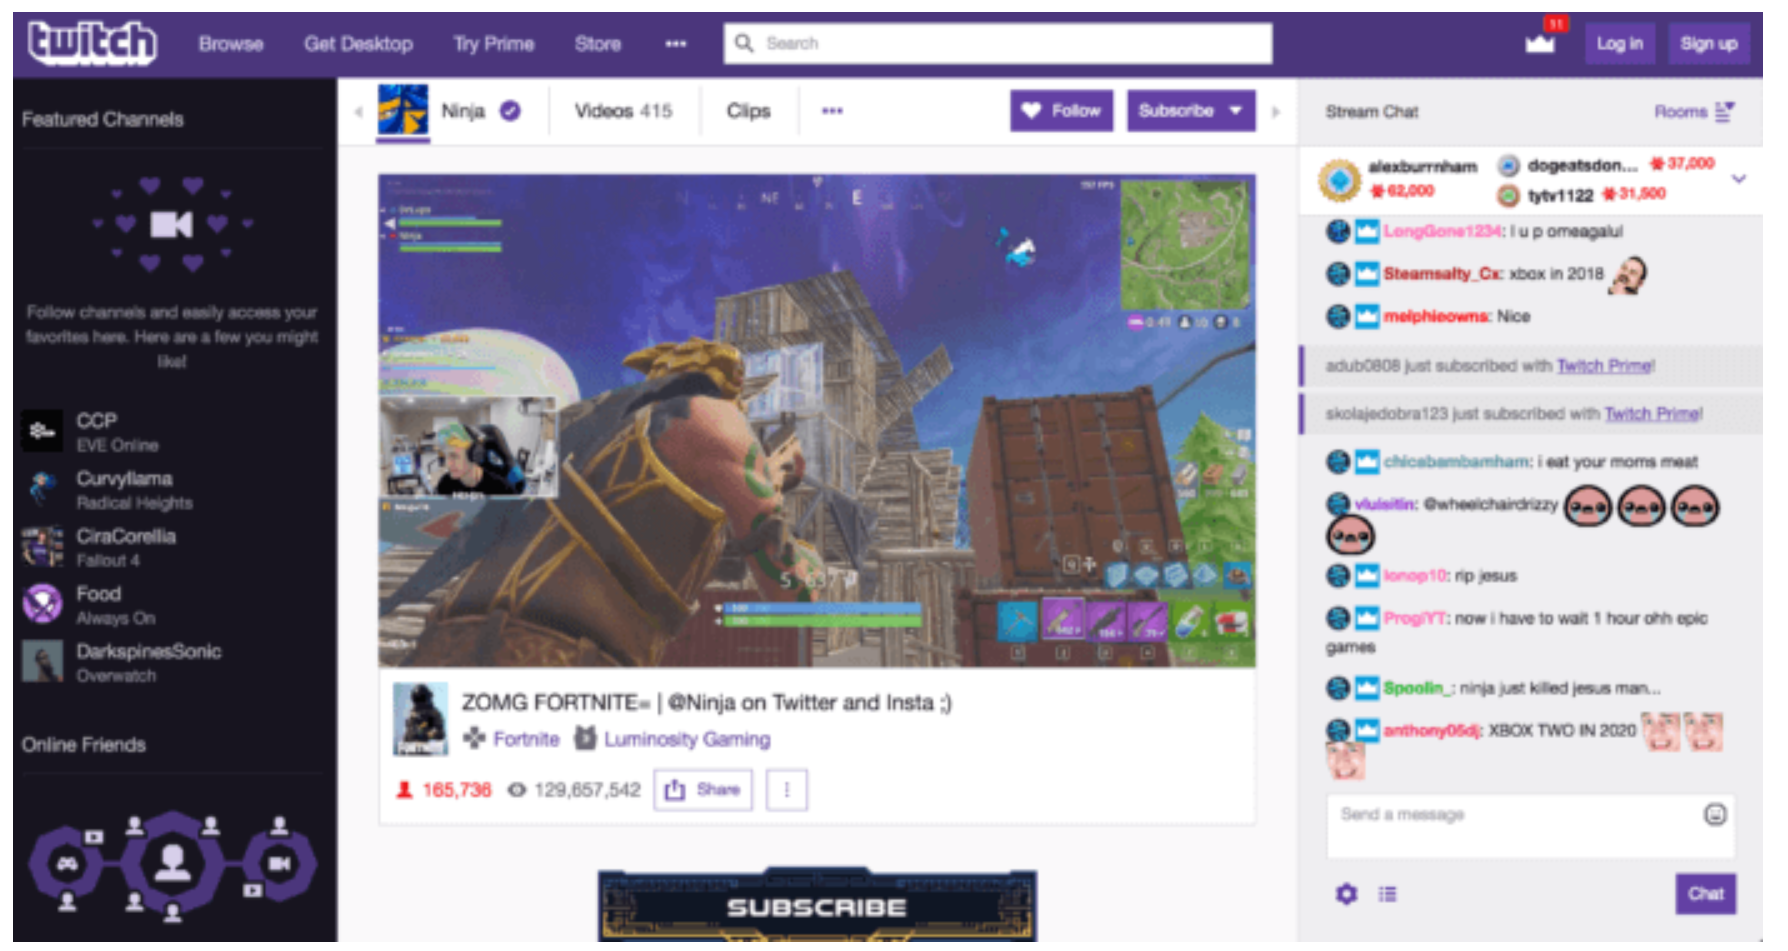 Watch Videos and Chat with New Friends on Twitch - share your interests